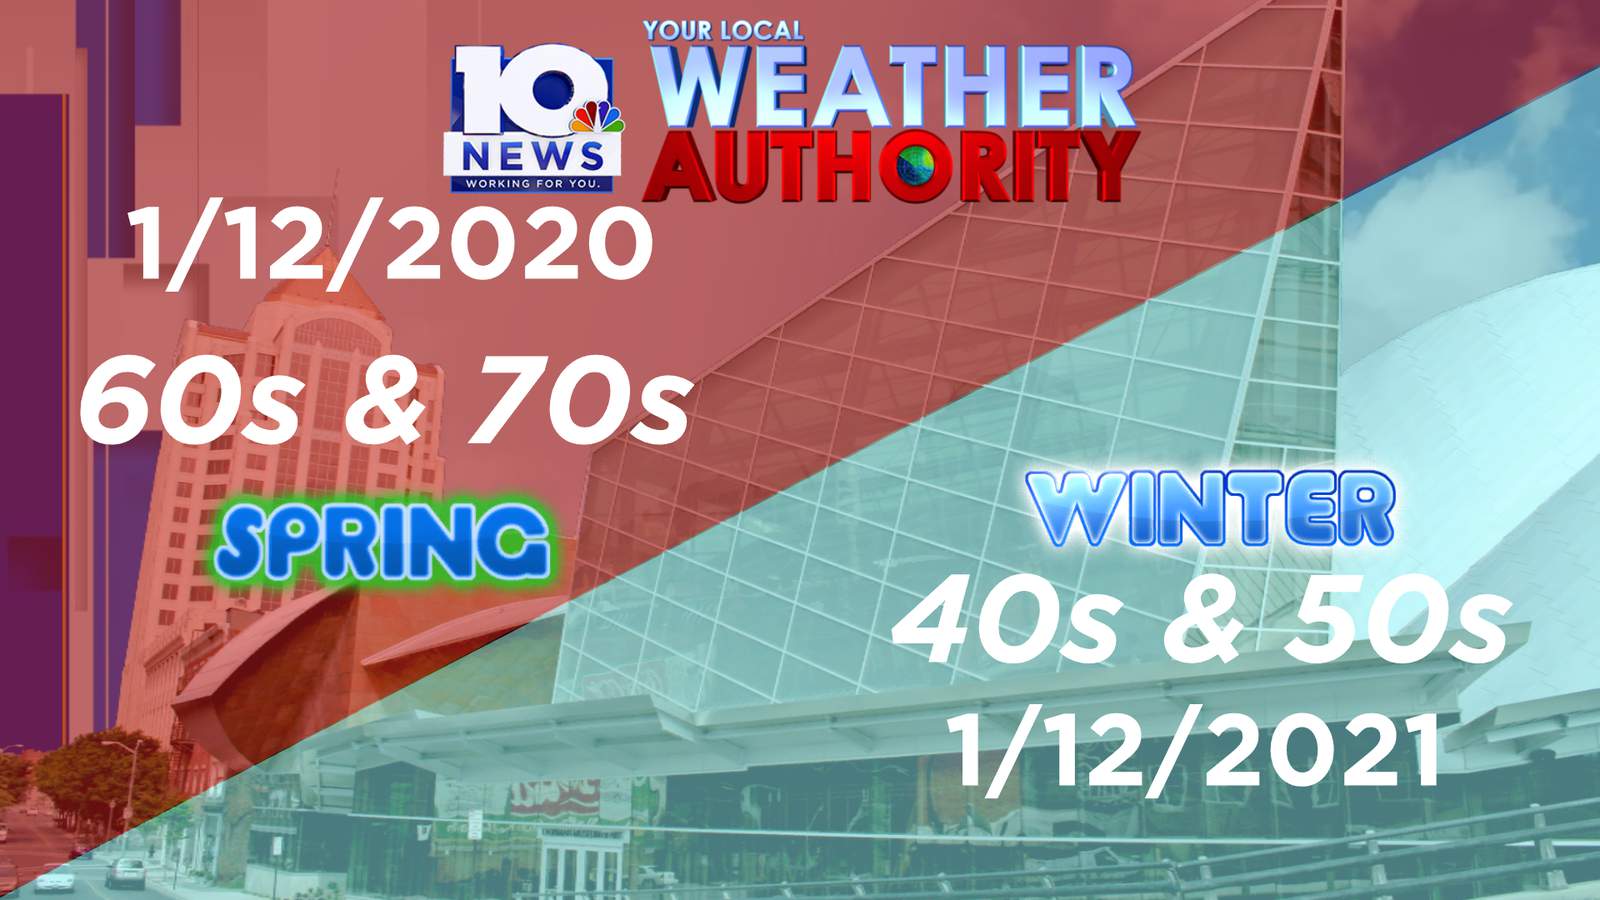 No record warmth like last year, but a warming trend coming this week